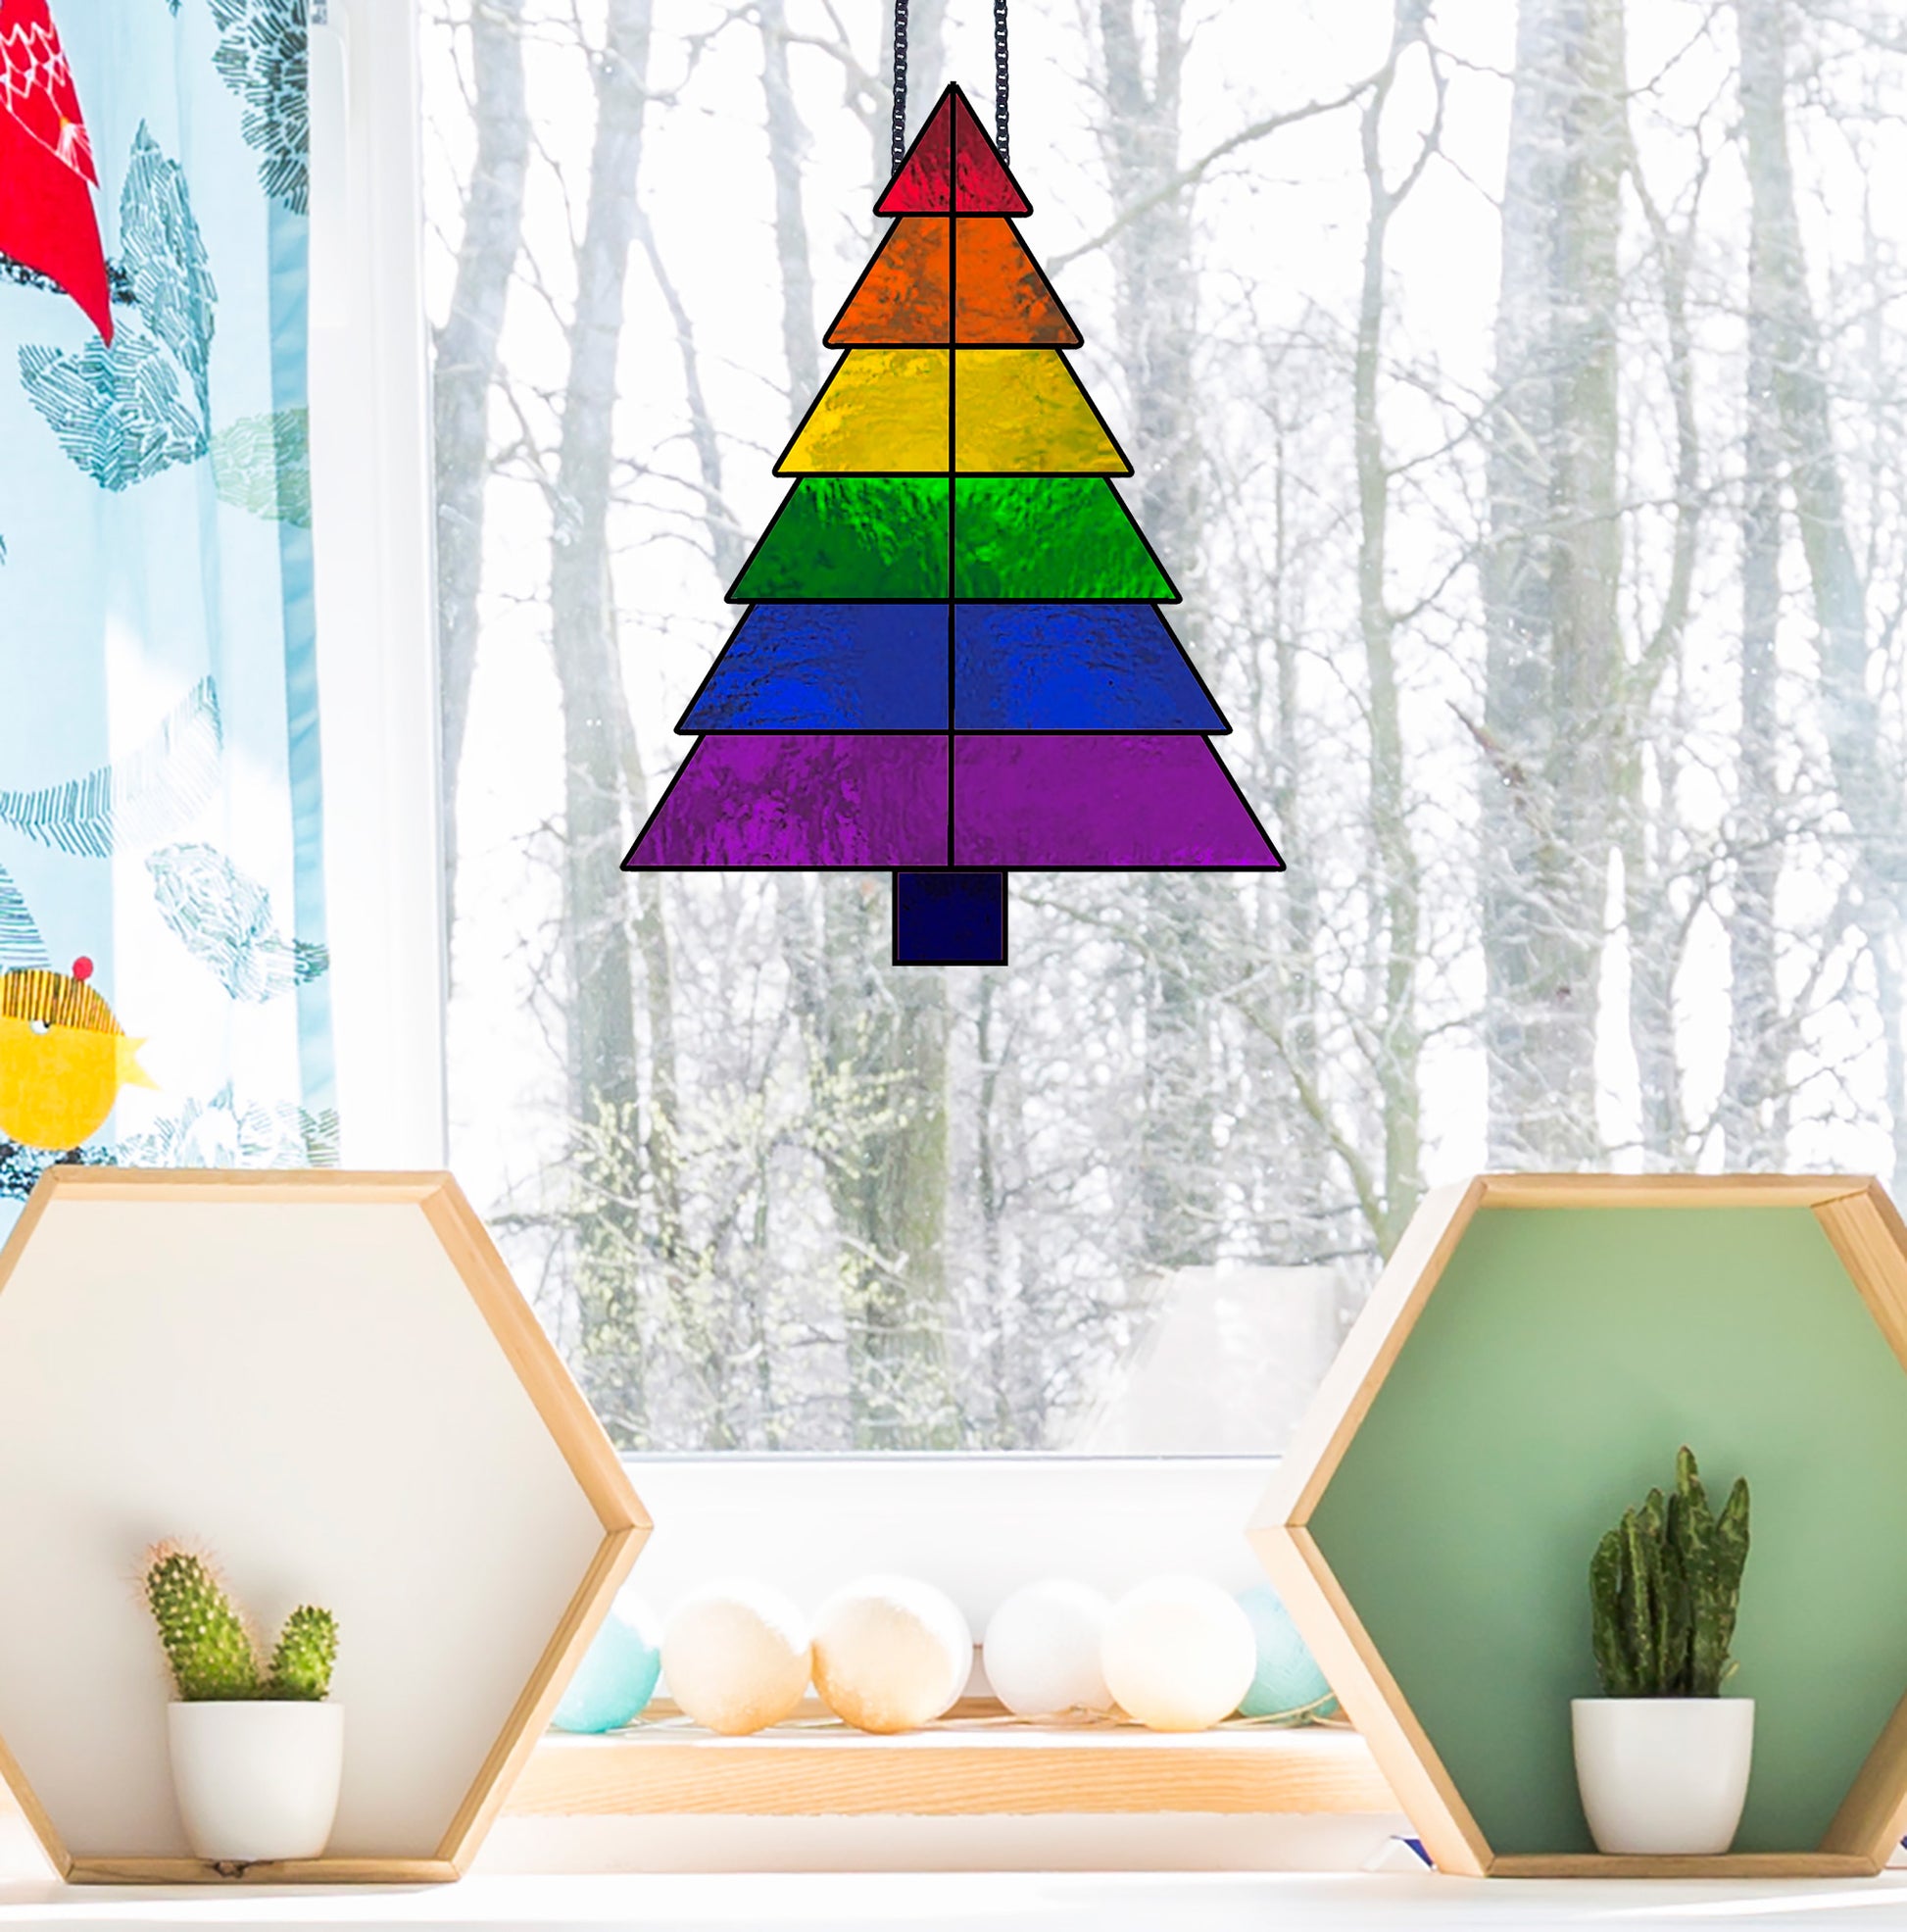 Beginner stained glass pattern for a rainbow Christmas tree, instant PDF download, shown hanging in a window with a snowy background